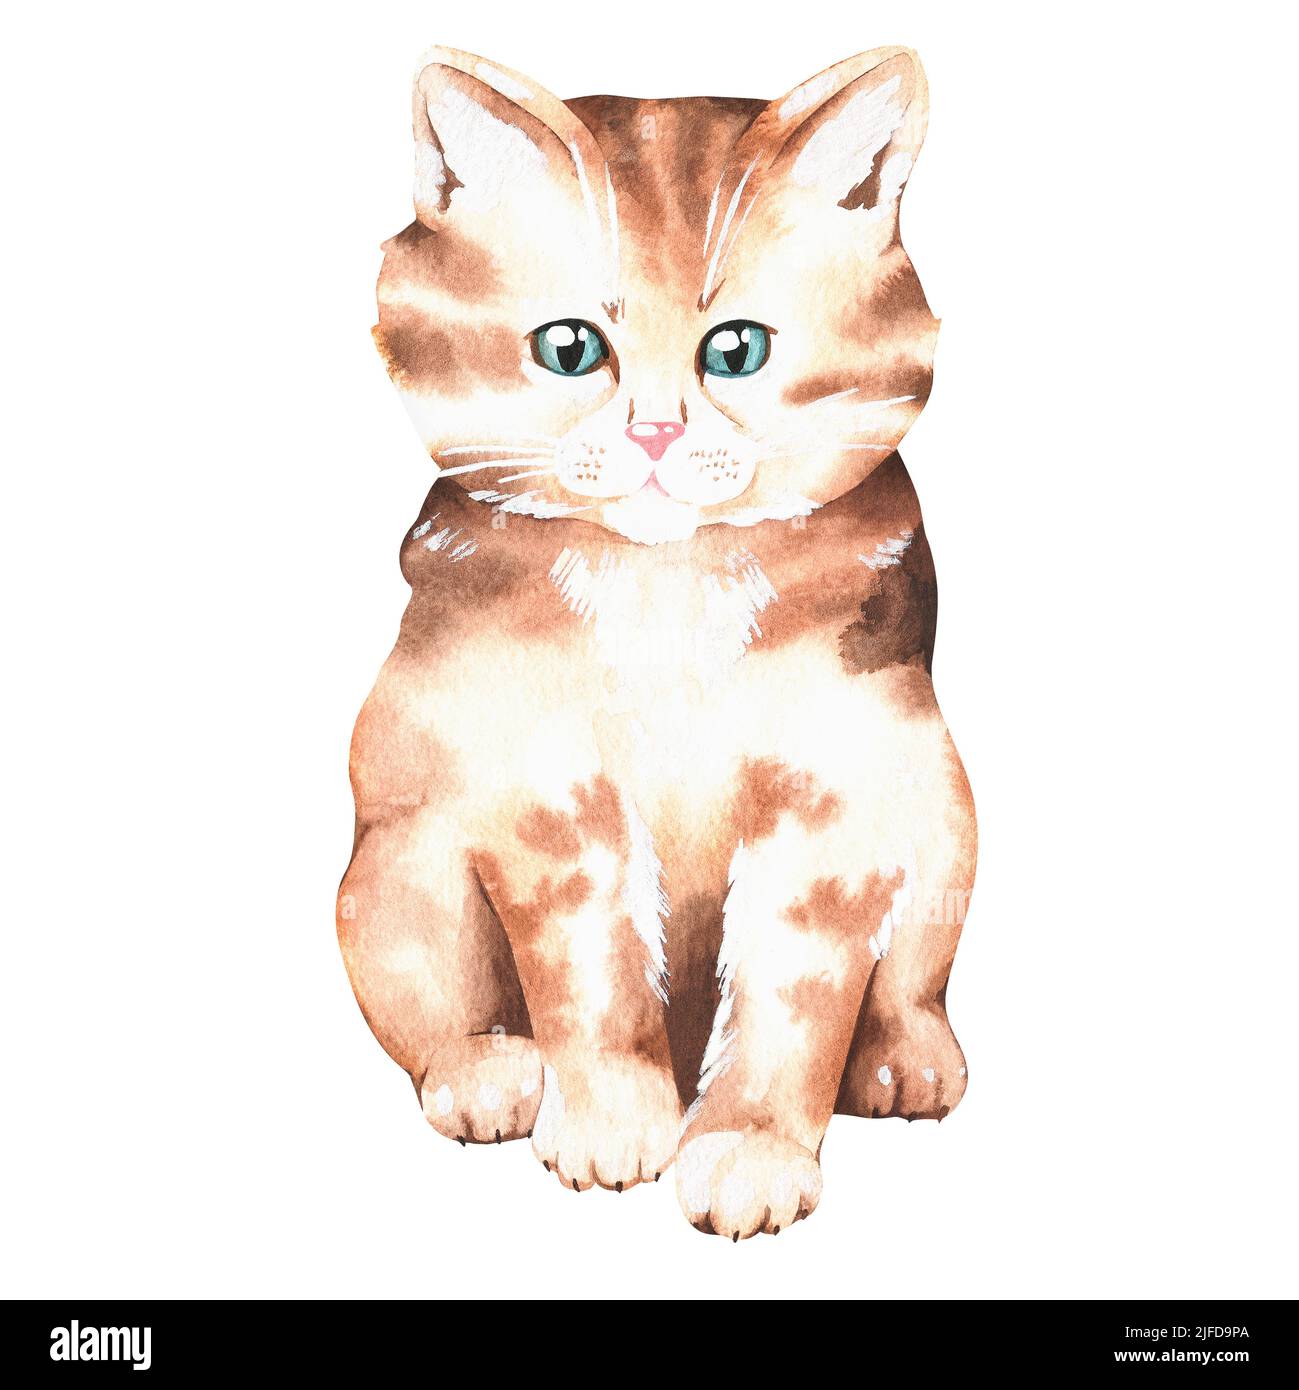 The striped kitten is sitting. Watercolor illustration. Isolated on a white background. For your design birthday greeting cards, baby products Stock Photo